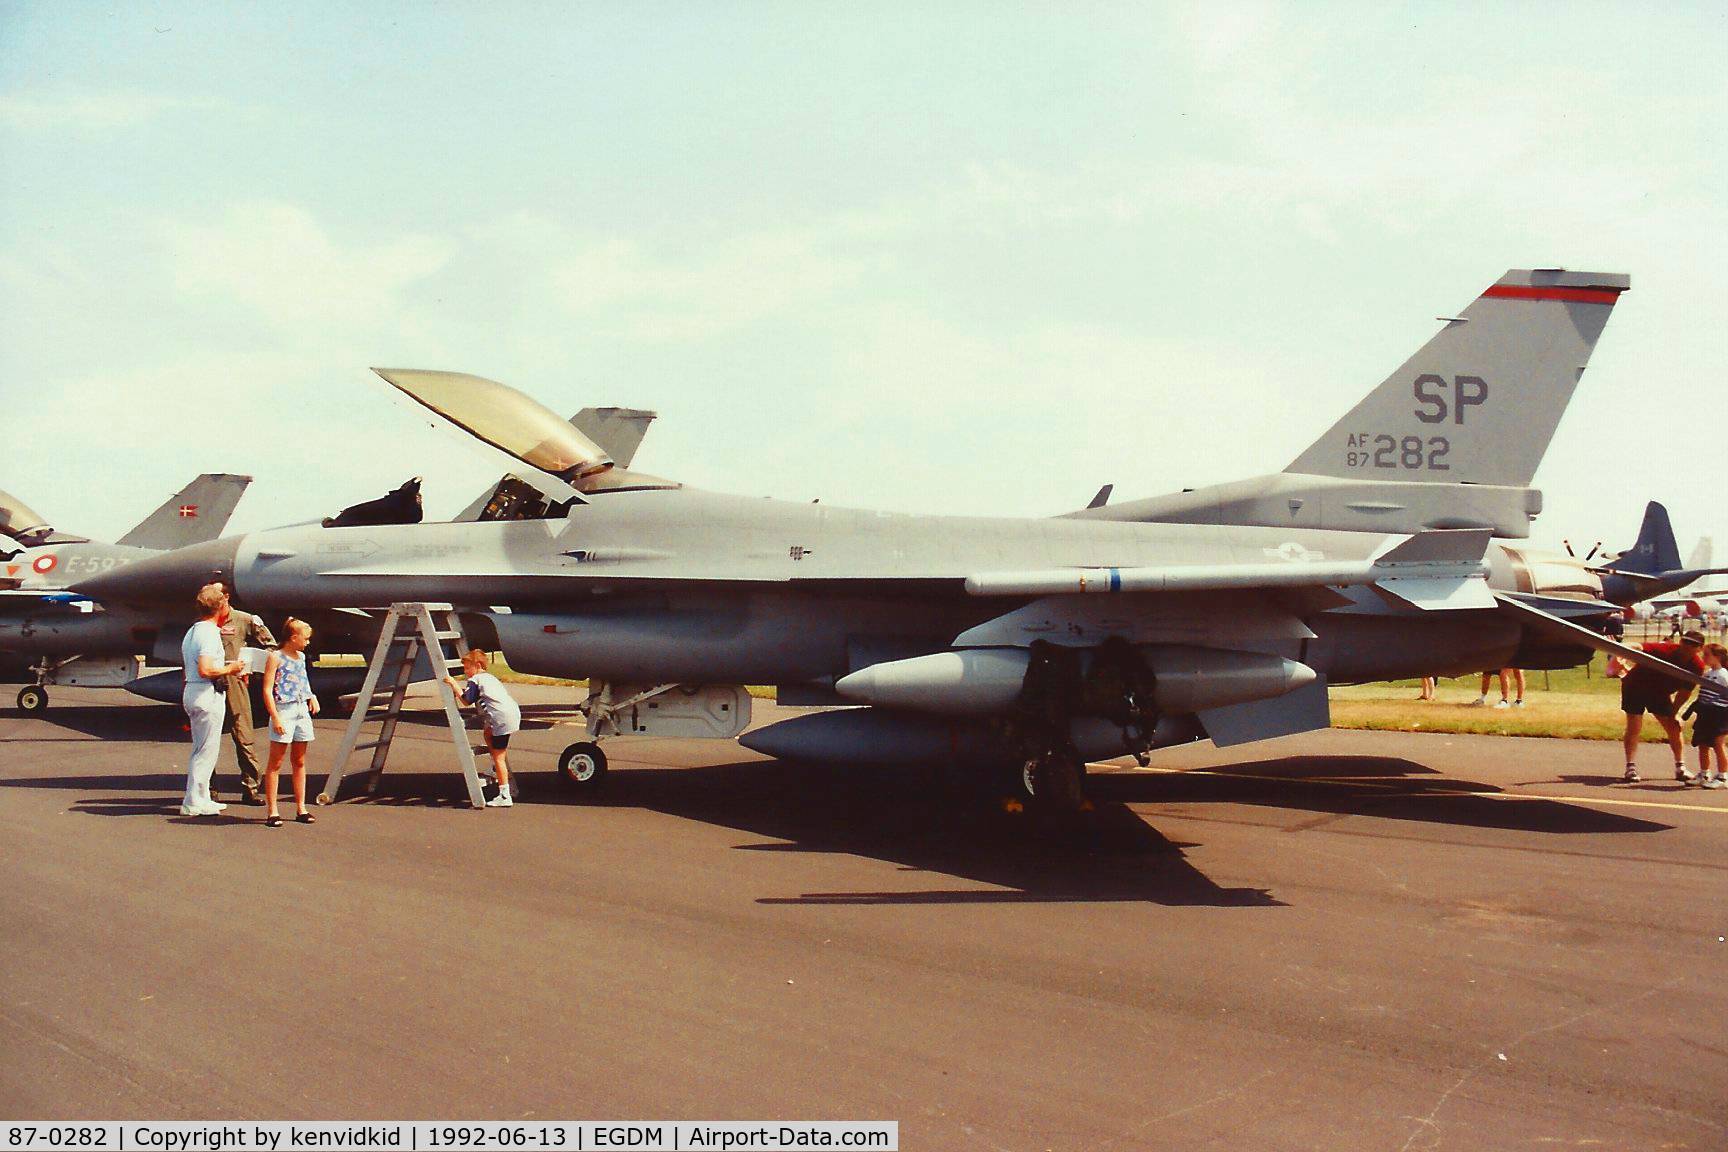 87-0282, 1987 General Dynamics F-16C Fighting Falcon C/N 5C-543, At Boscombe Down, scanned from print.